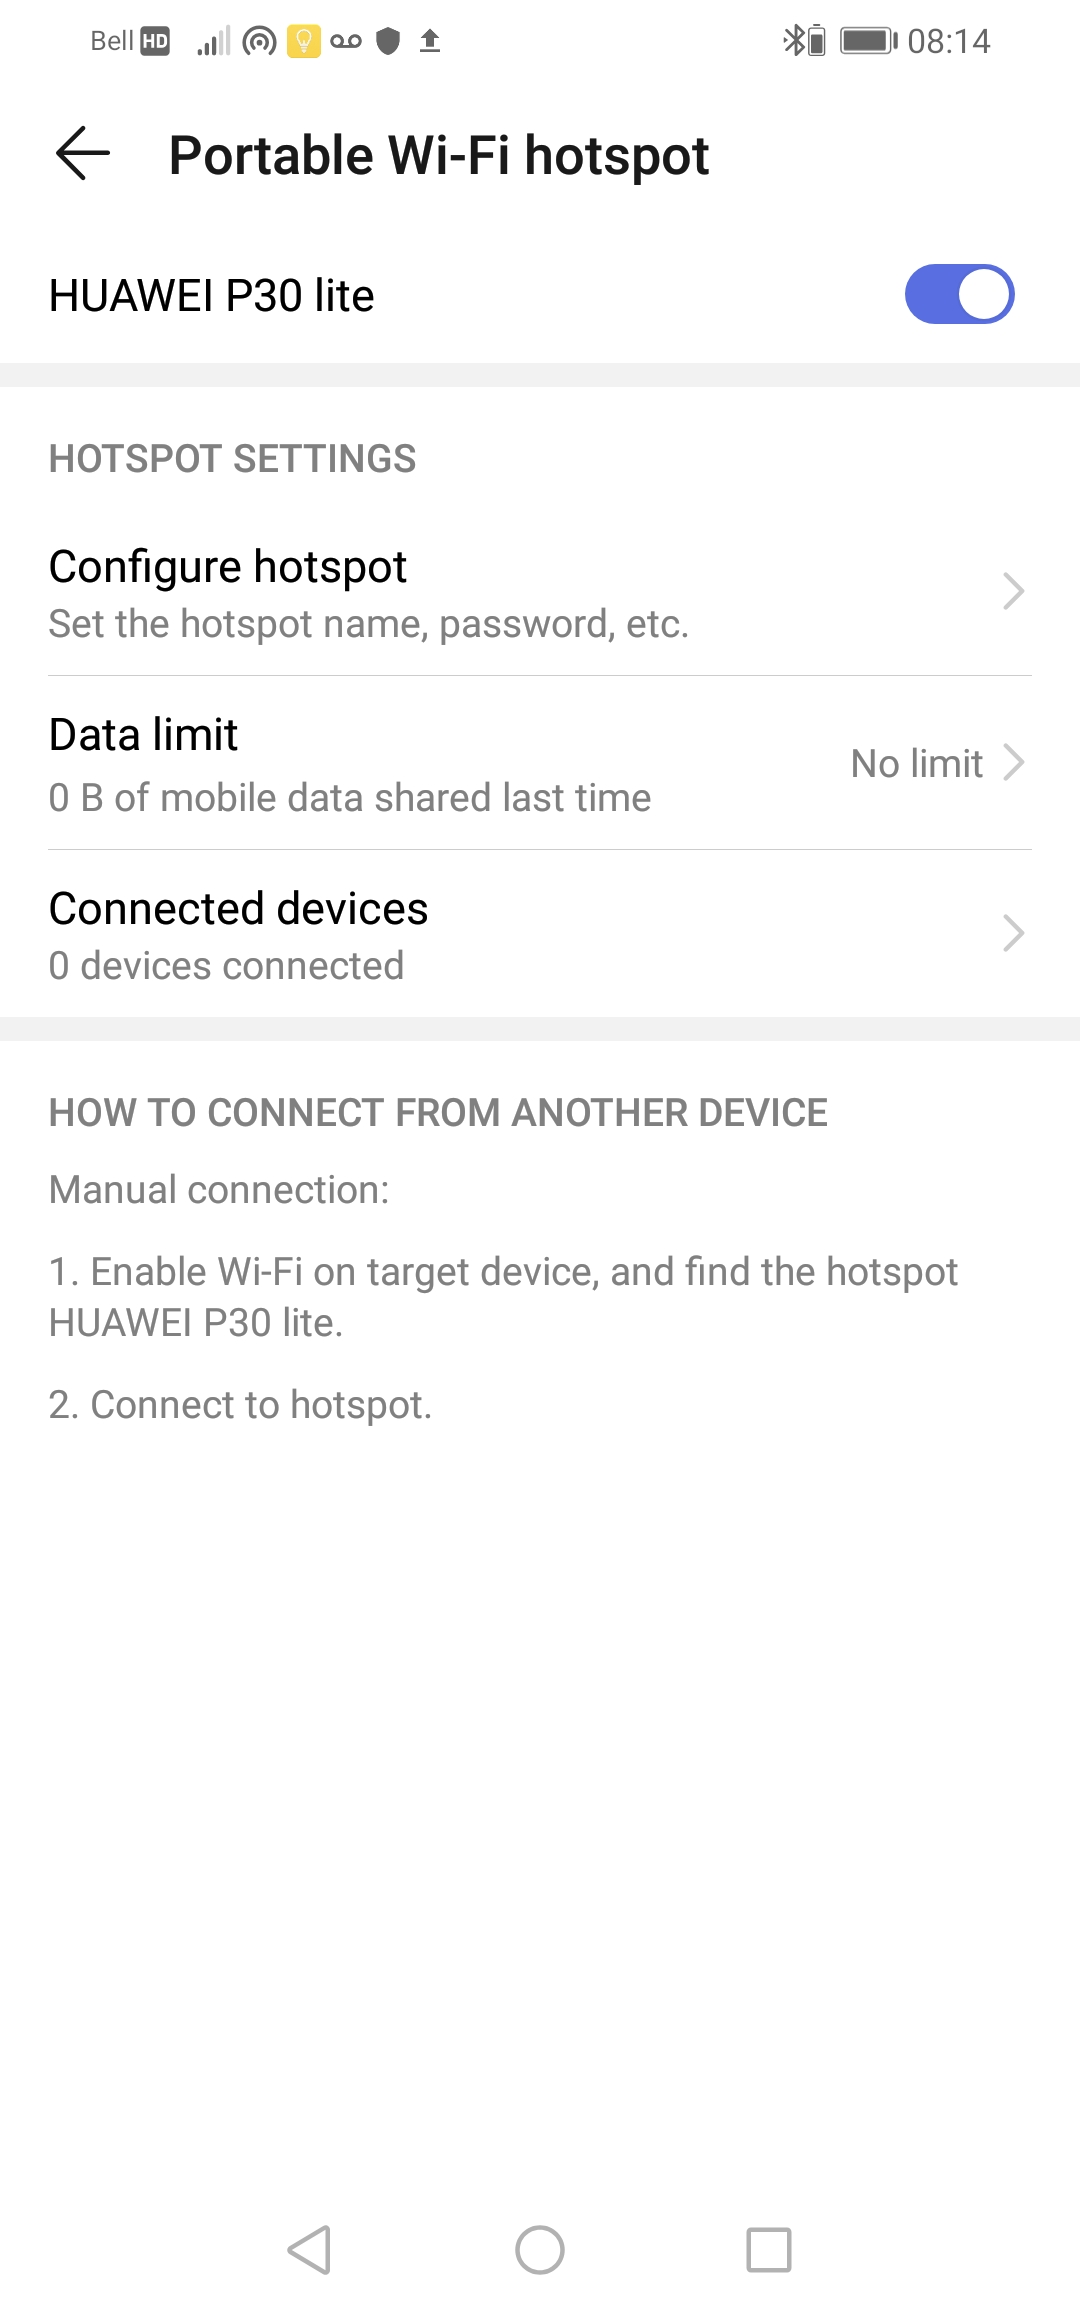 The portable Wi-Fi hotspot is now active. Other devices can connect to it using your network name (step 7) and password (step 10).